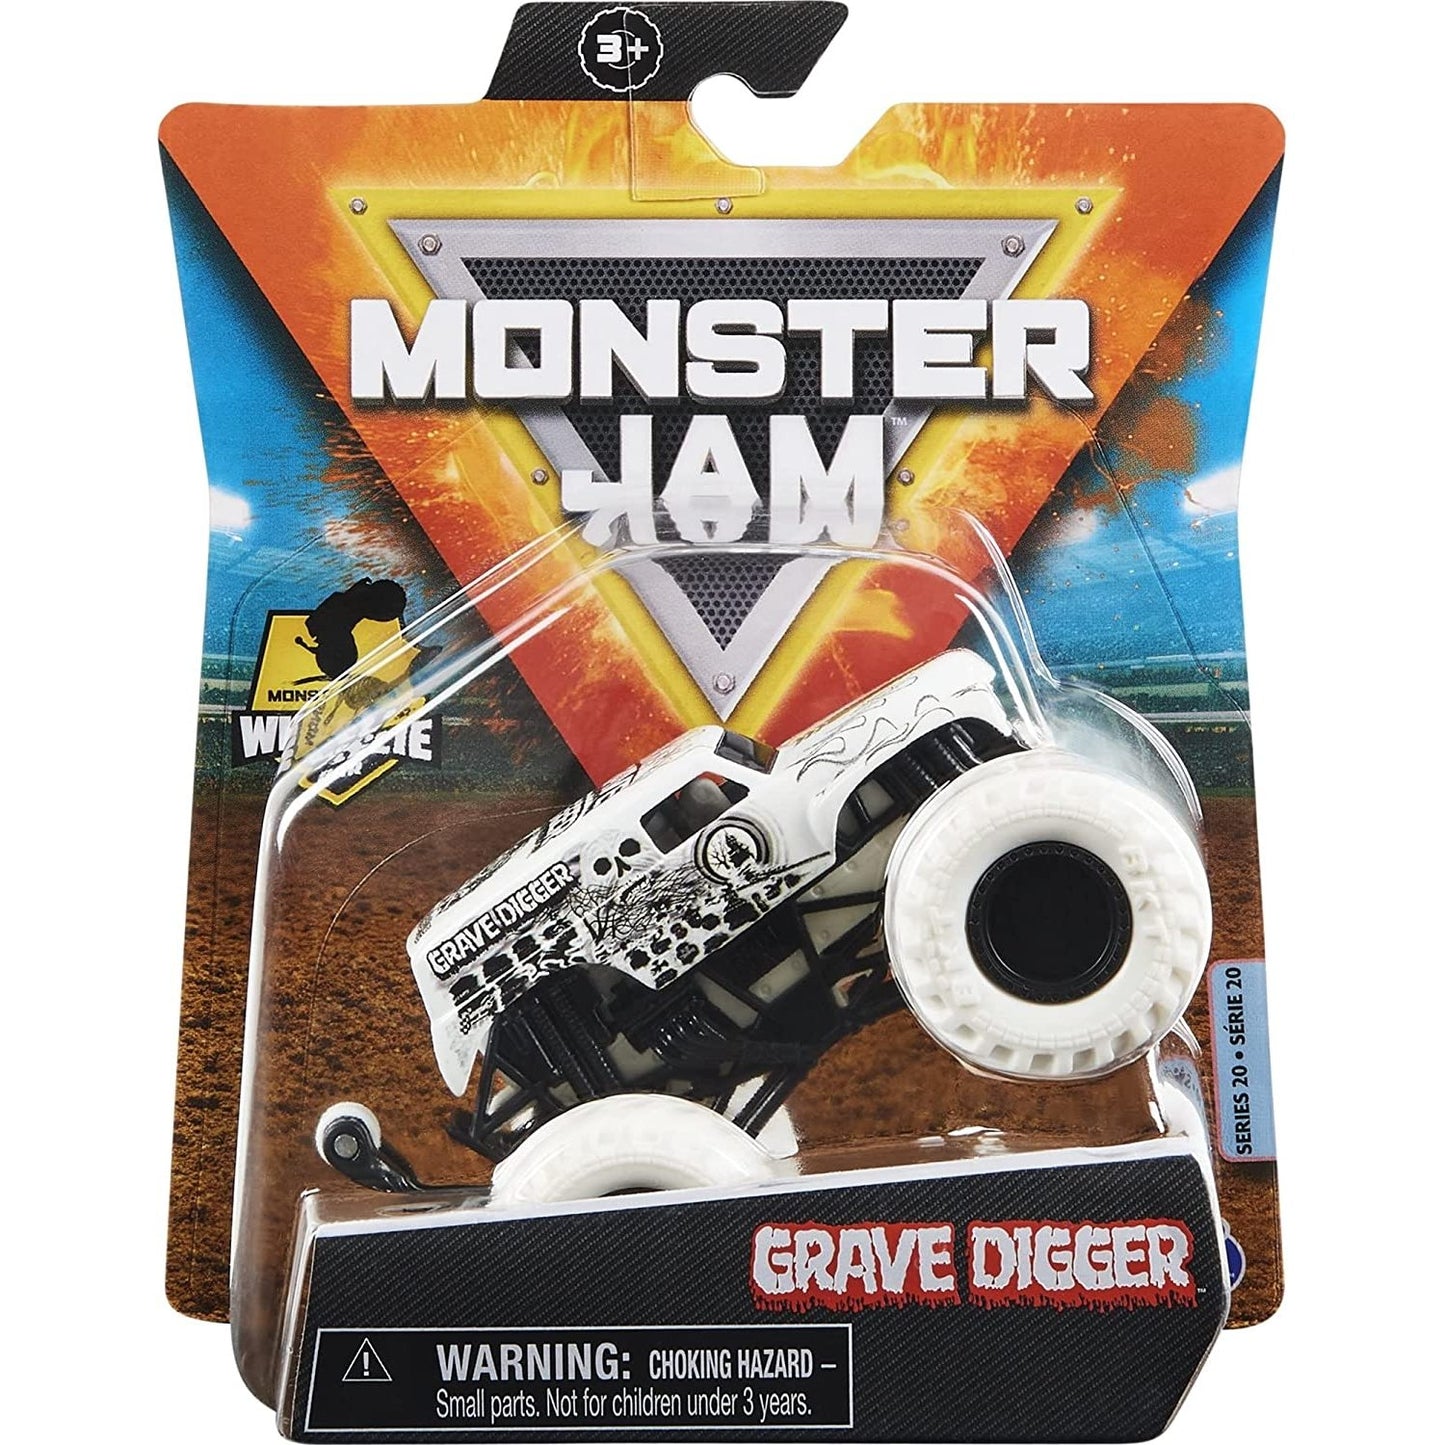 Monster Jam 2021 Spin Master 1:64 Diecast Monster Truck with Wheelie Bar: White Max Contrast Grave Digger from 2P Gaming